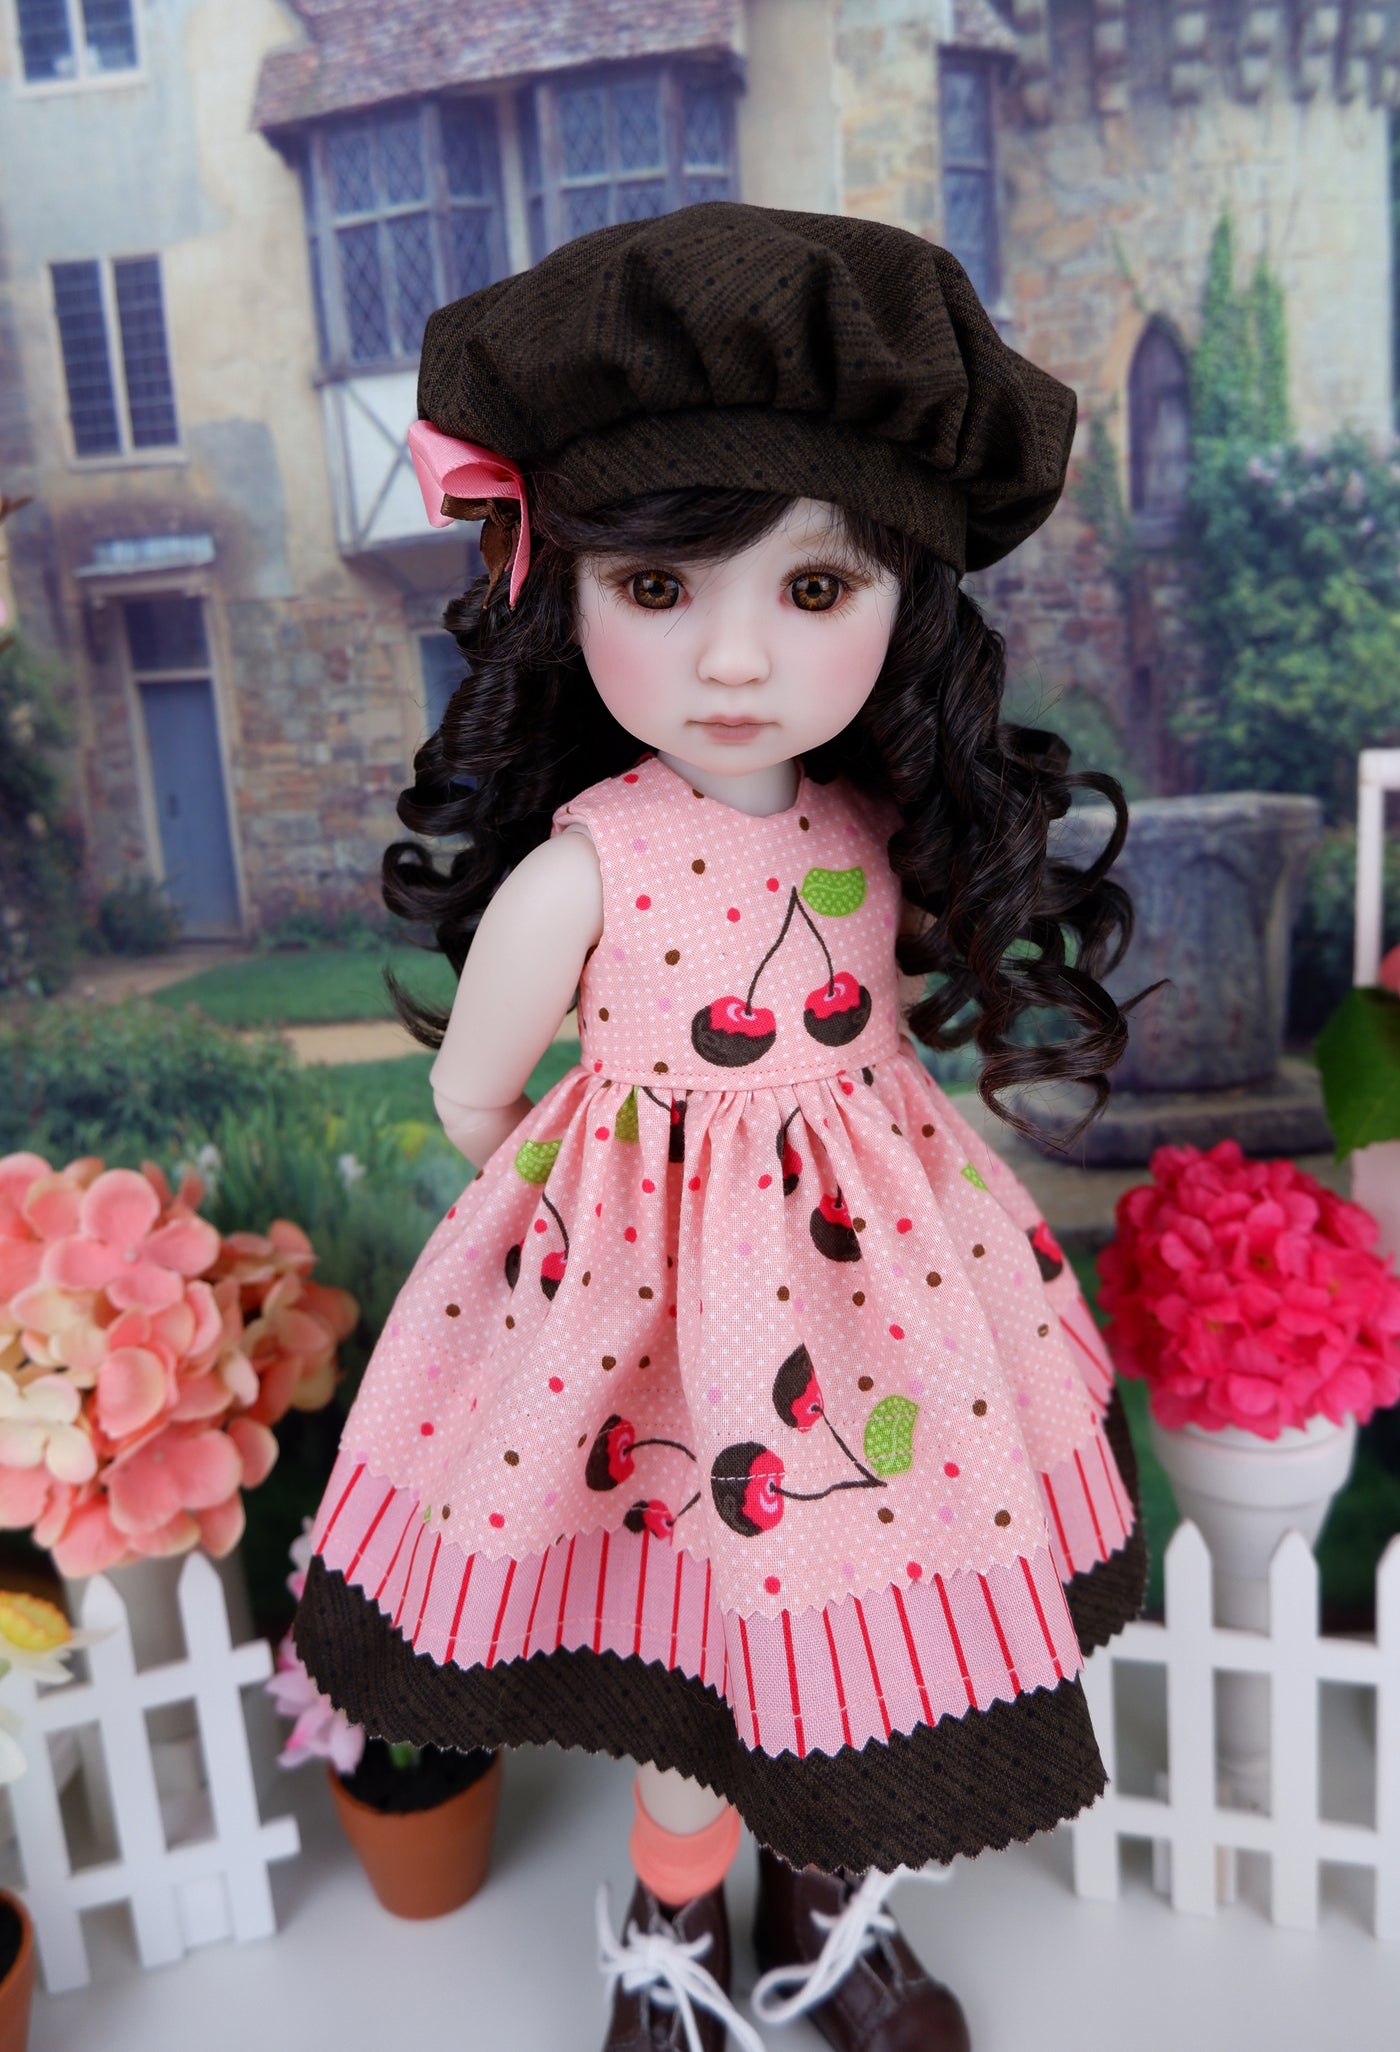 Chocolate Covered Cherry - dress with boots for Ruby Red Fashion Friends doll